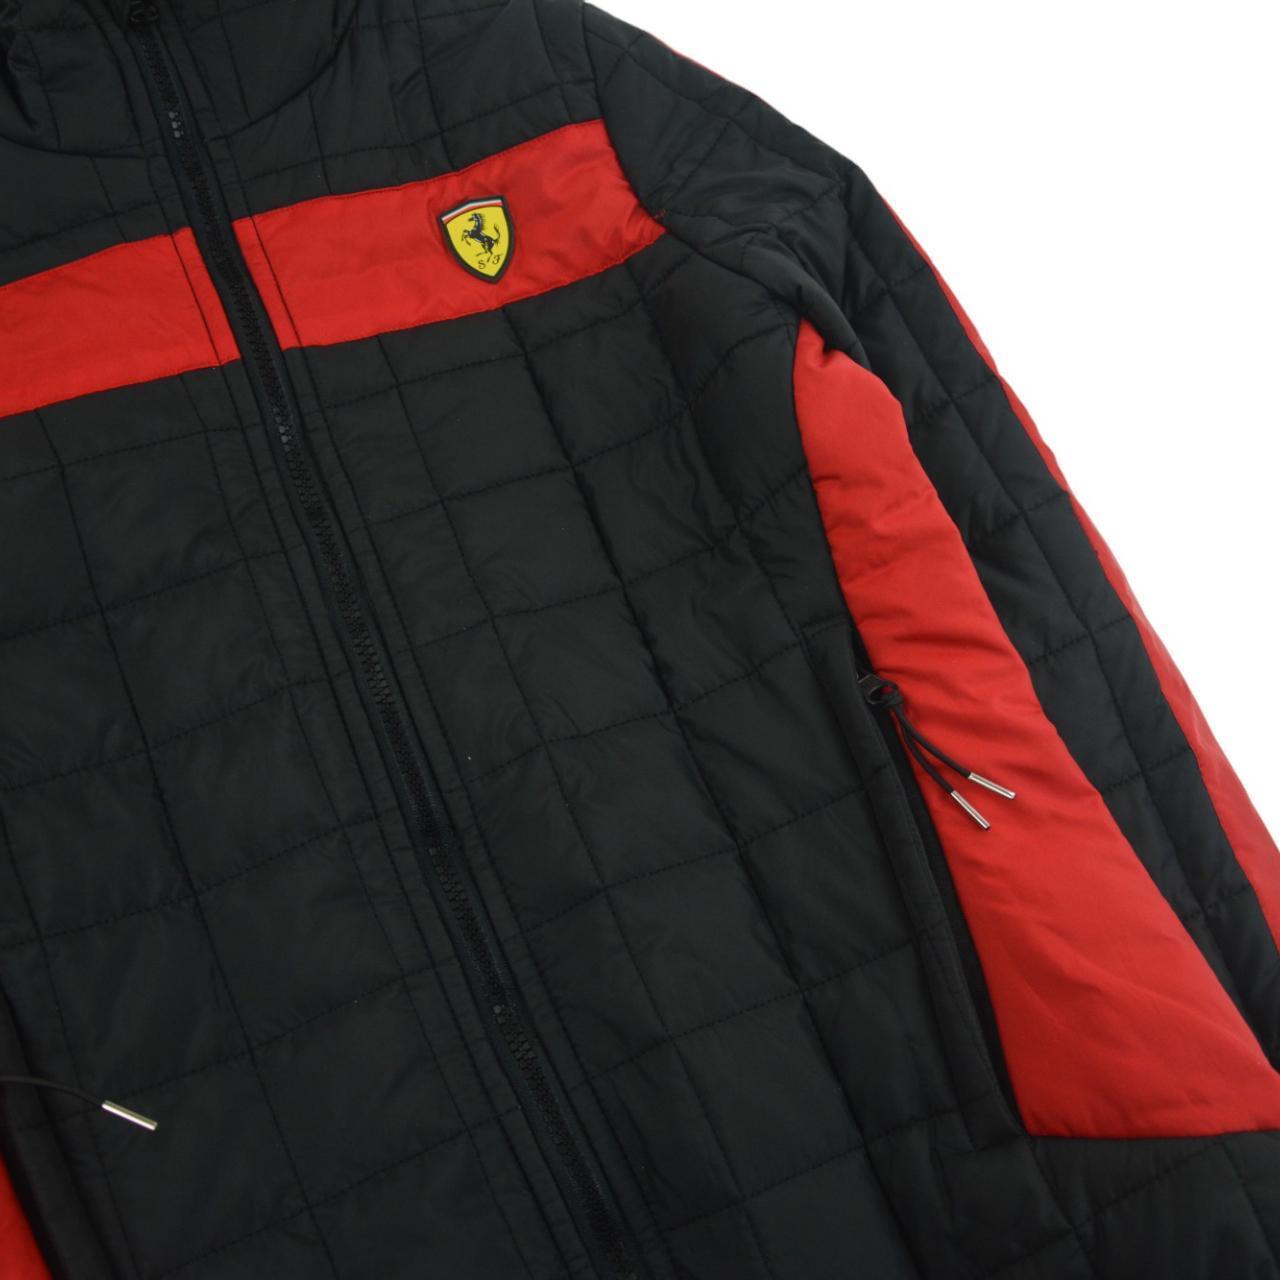 Vintage Ferrari Padded Jacket Woman’s Size S - Known Source